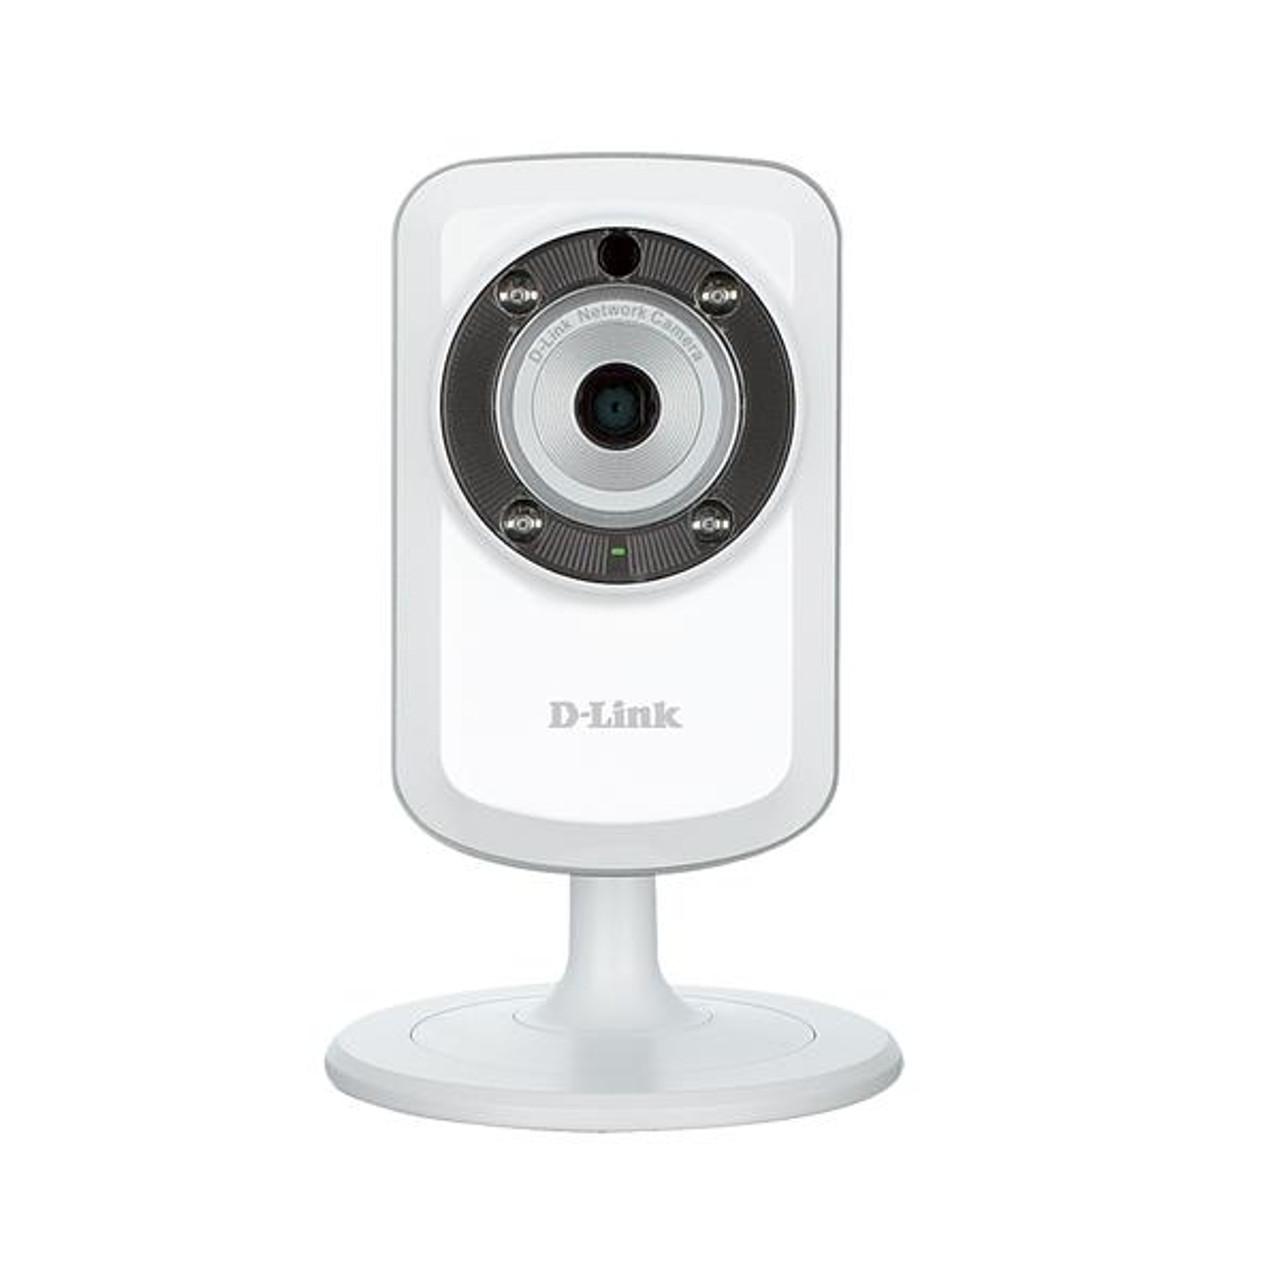 DCS-933L D-Link DCS-933L Network Camera Color, Monochrome CMOS Cable, Wireless Wi-Fi Fast Ethernet (Refurbished)